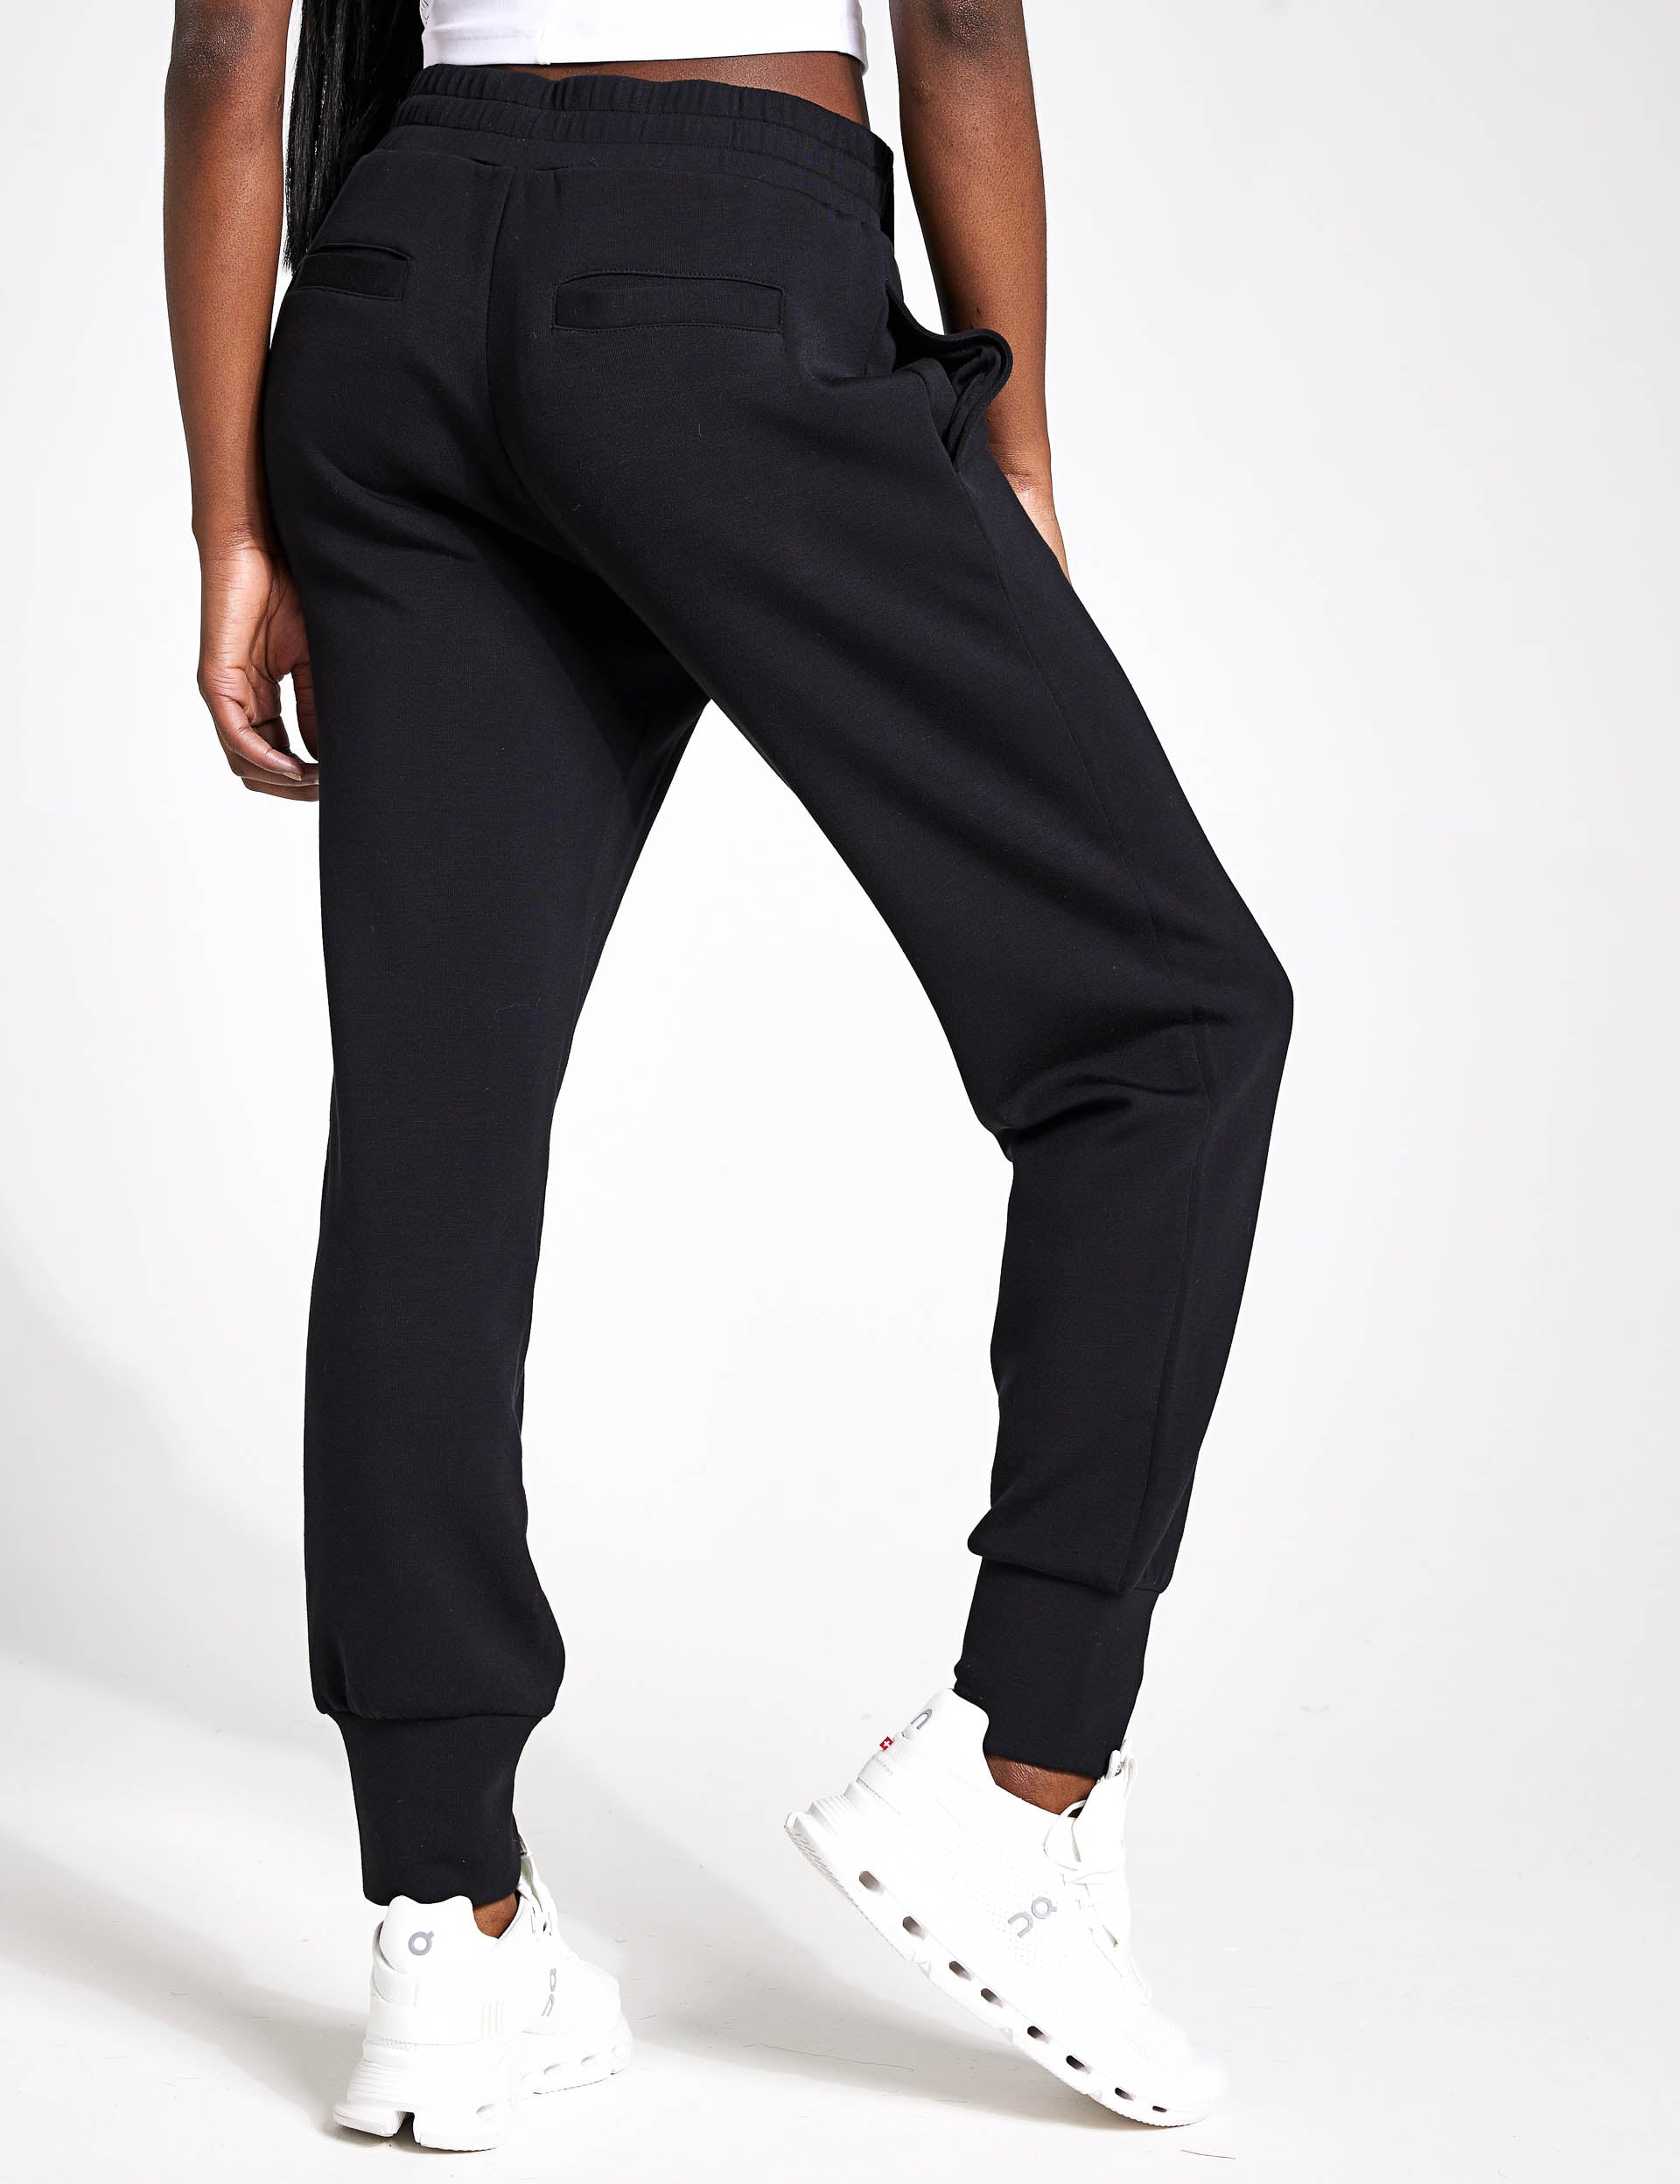 The Slim Cuff Pant 27.5 in Black exclusive at The Shoe Hive